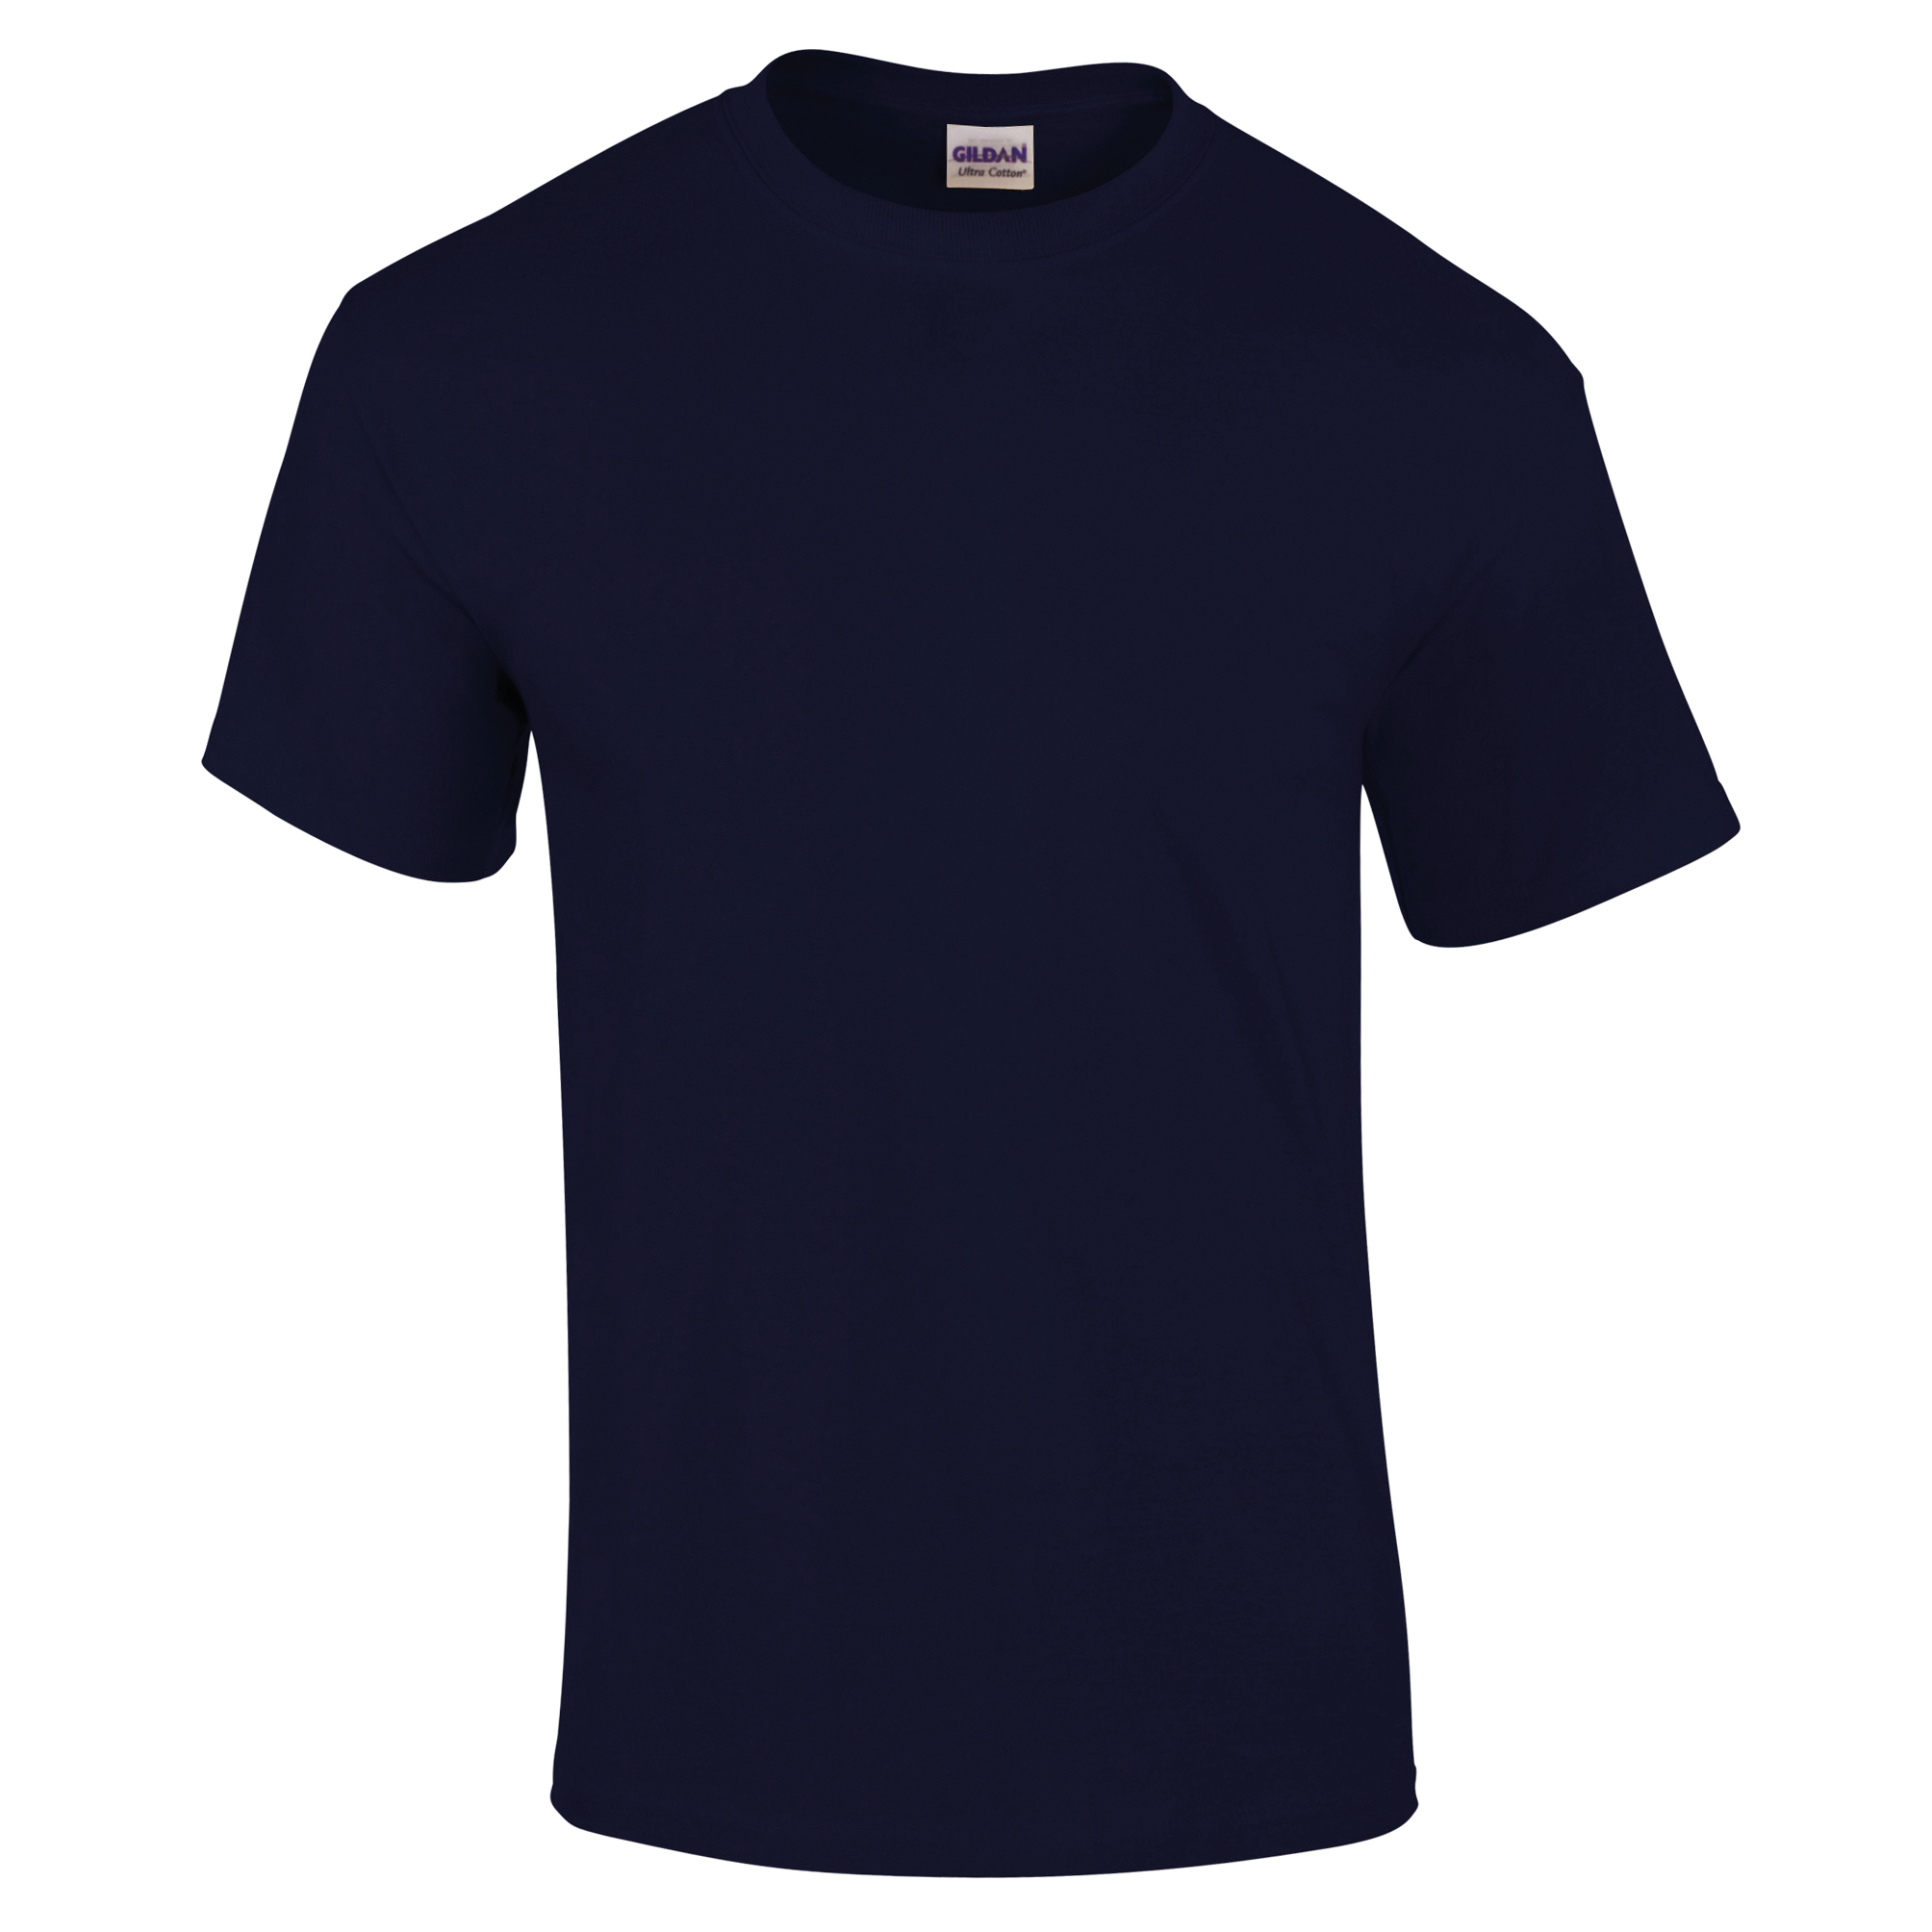 ax-httpswebsystems.s3.amazonaws.comtmp_for_downloadultra-cotton-navy.jpg